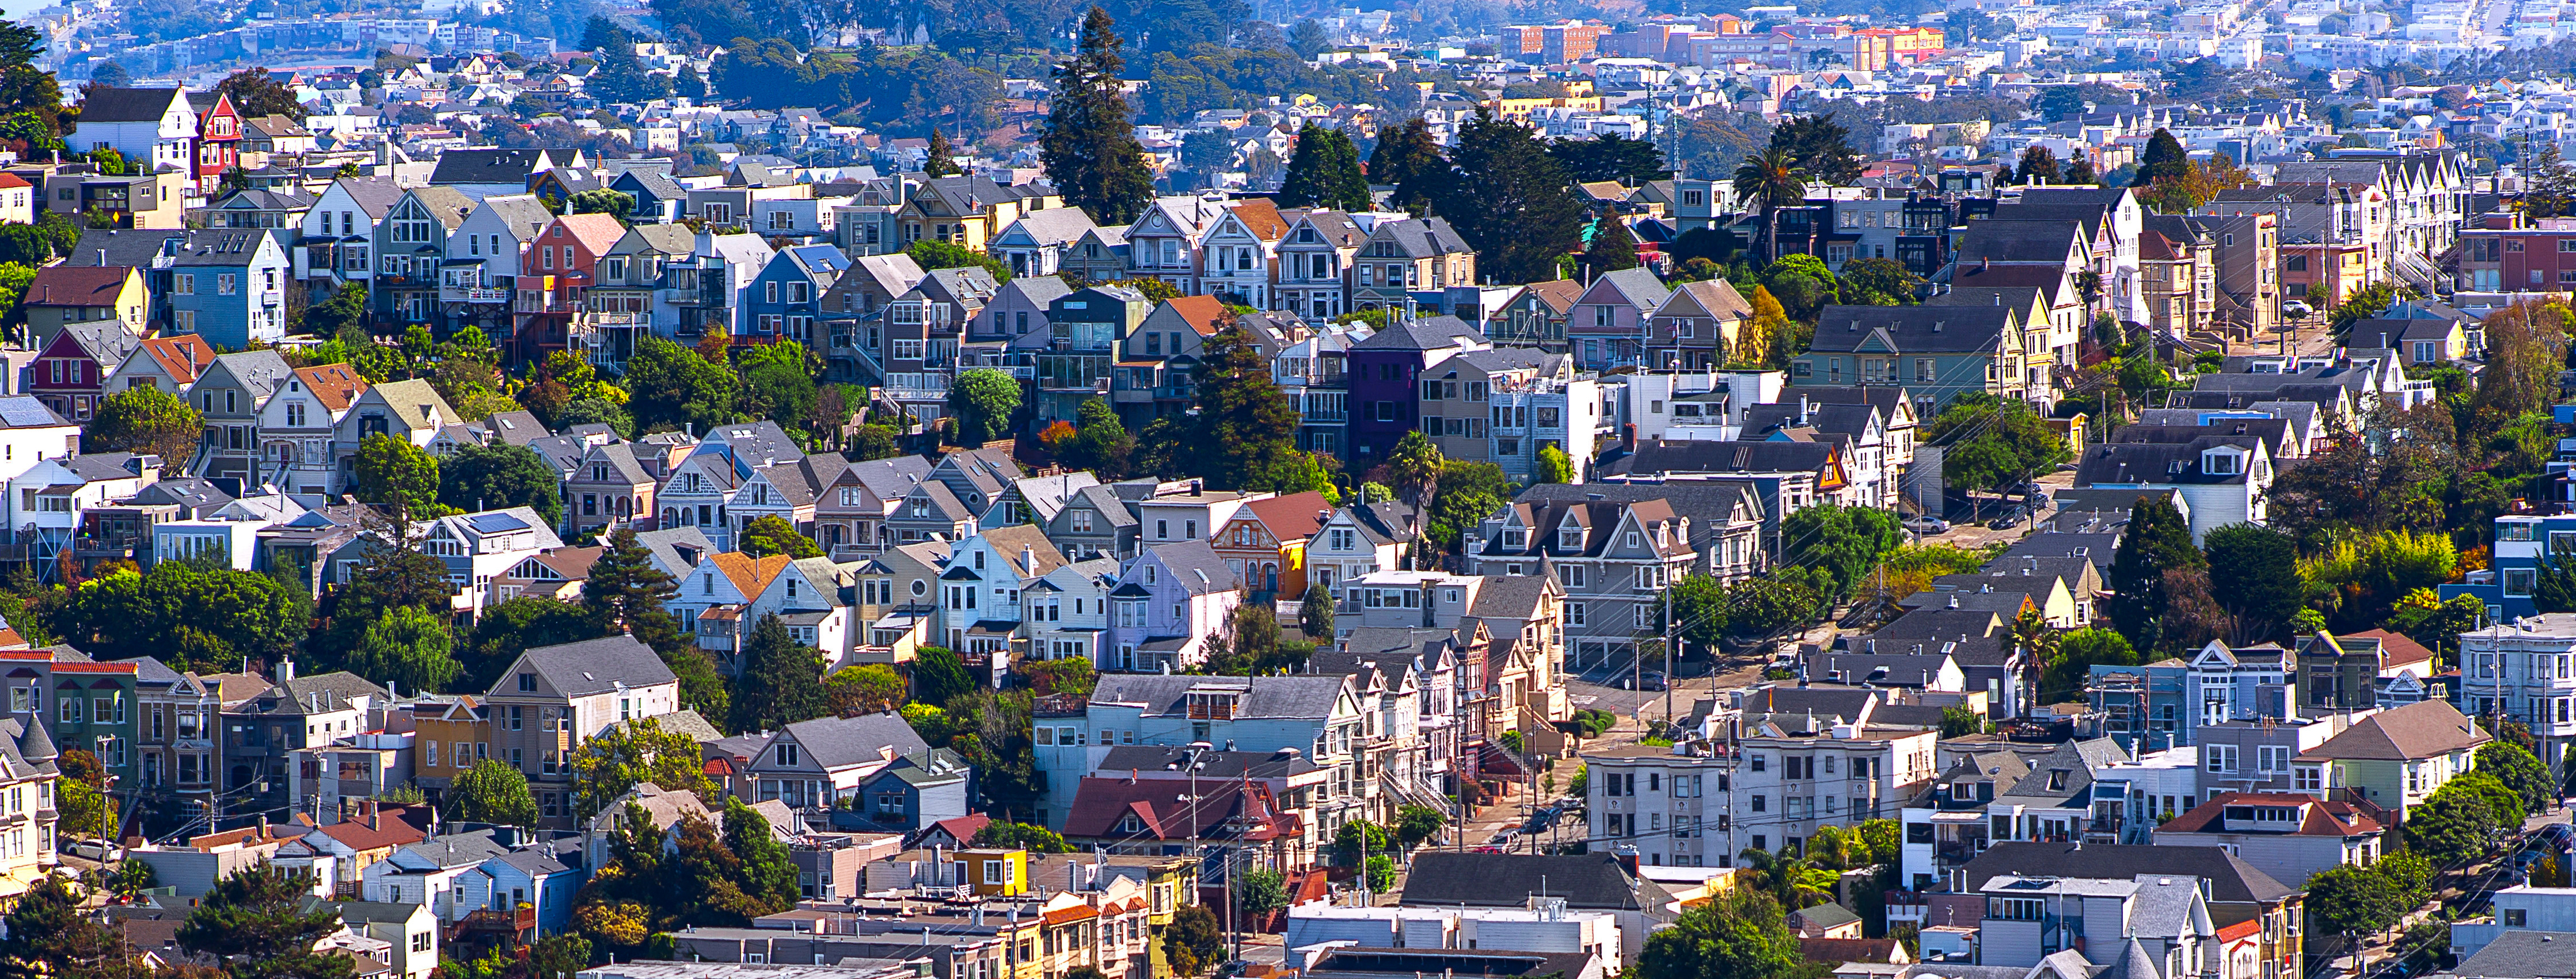 san francisco hill with houses